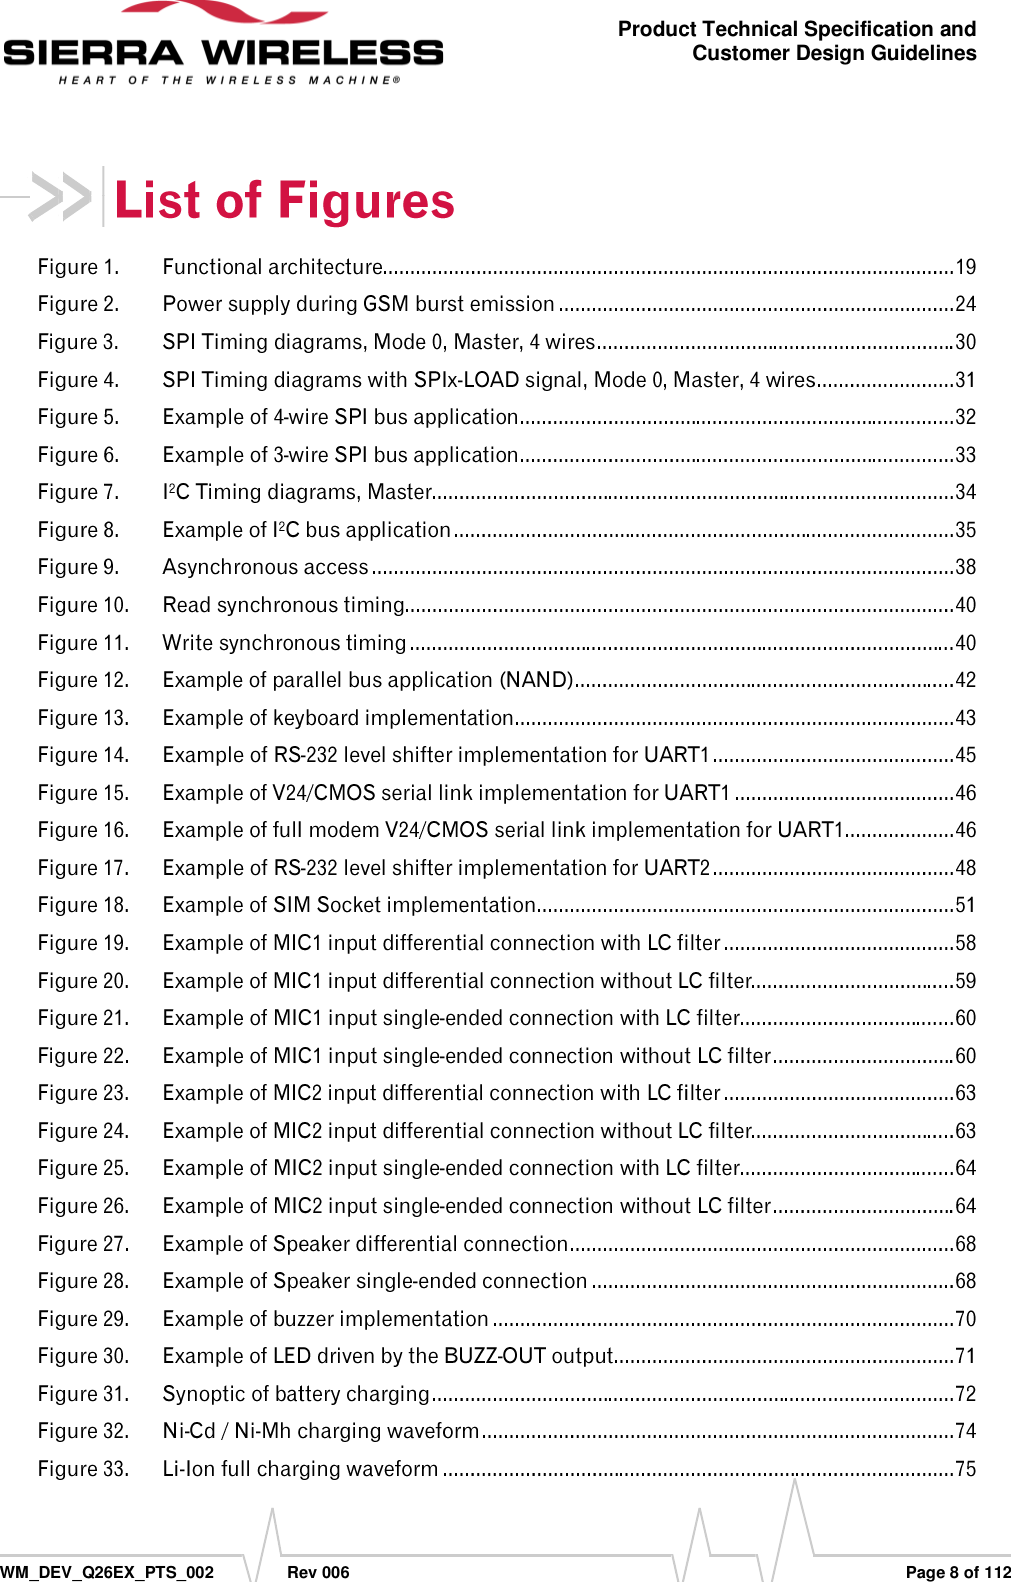      WM_DEV_Q26EX_PTS_002  Rev 006  Page 8 of 112 Product Technical Specification and Customer Design Guidelines                                                                                                                                            